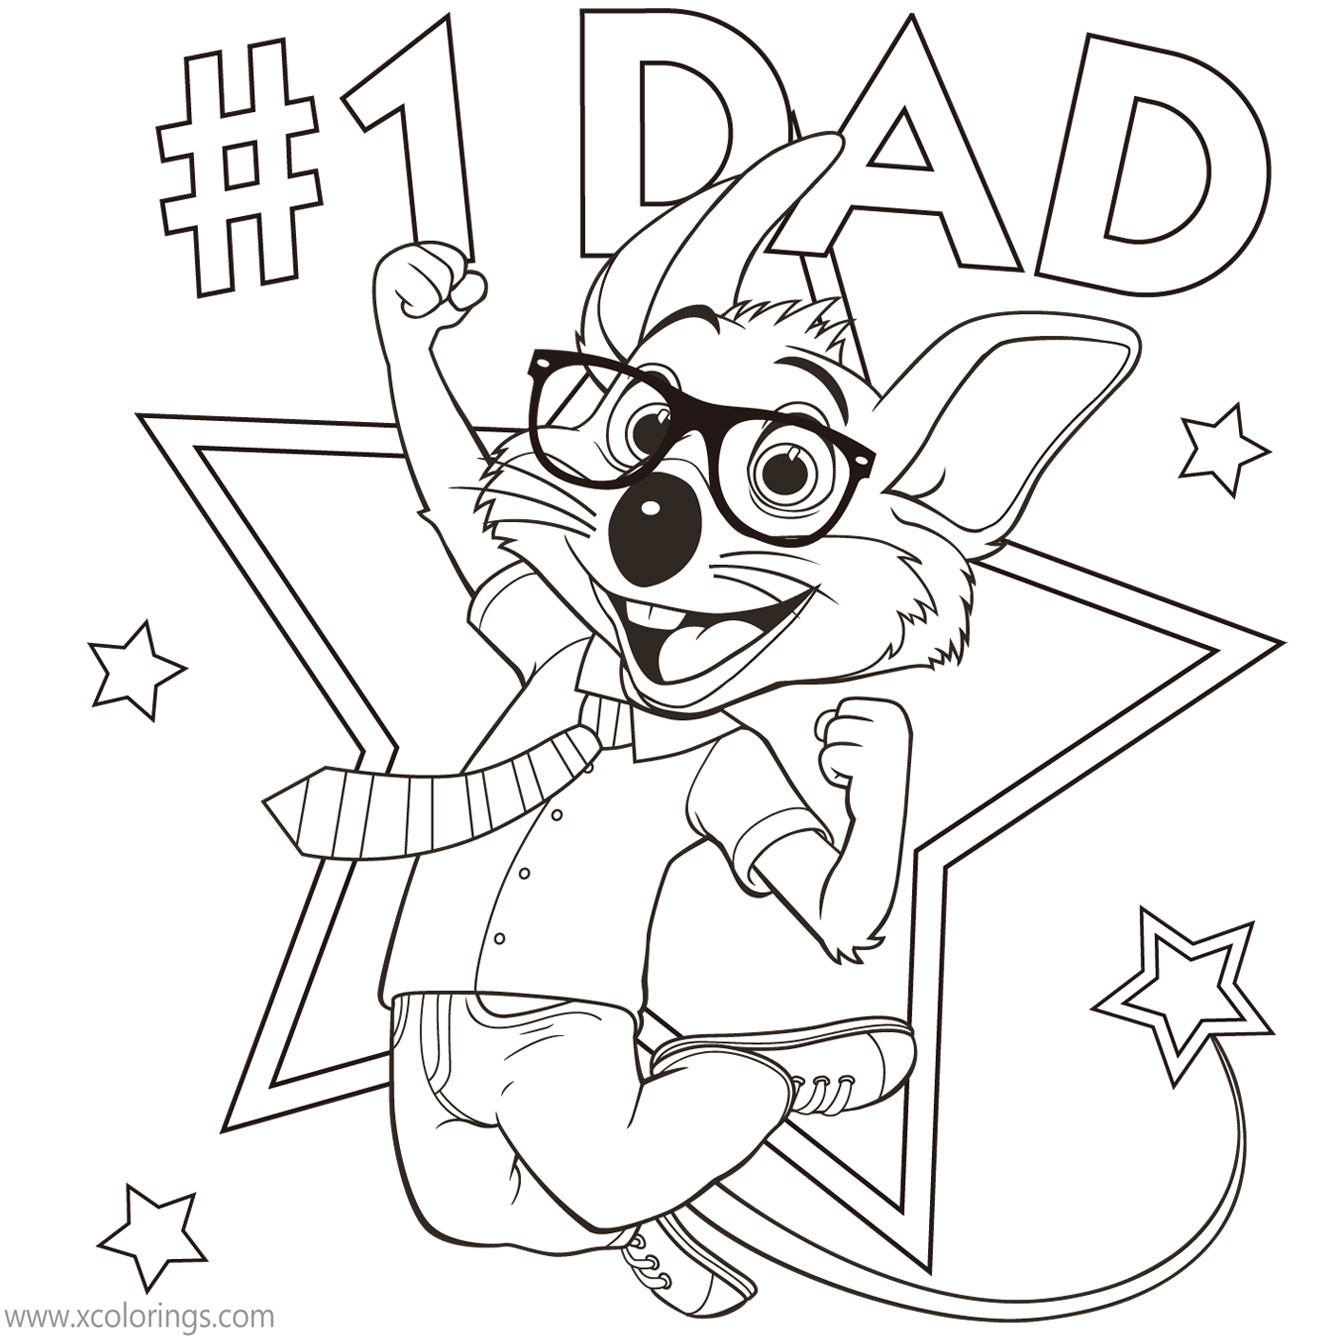 Free Chuck E Cheese Coloring Pages Father's Day printable